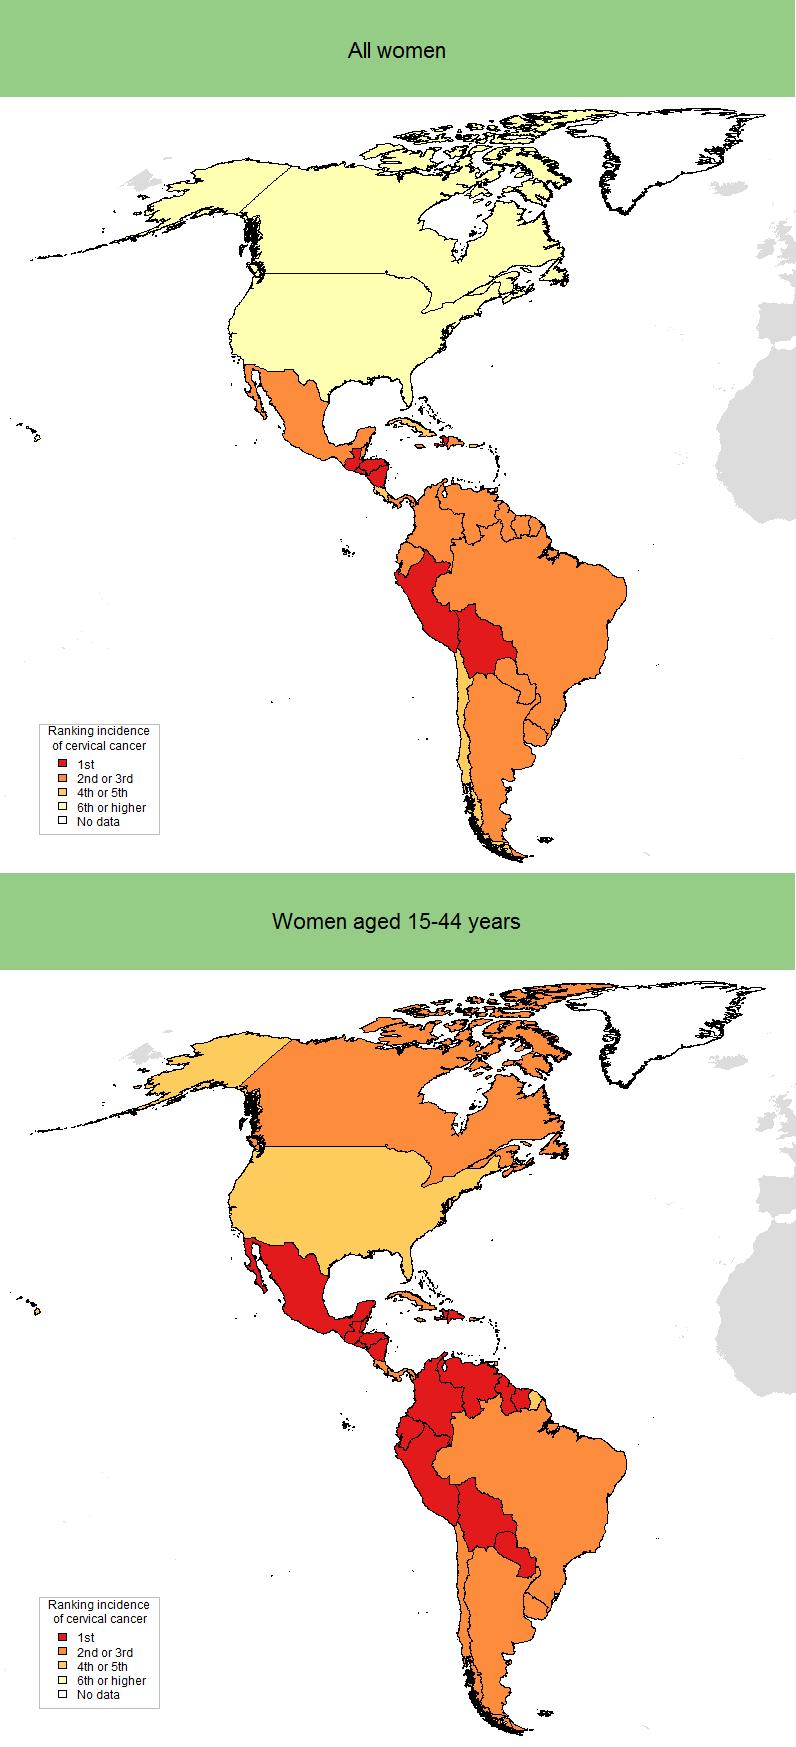 3 BURDEN OF HPV-RELATED CANCERS - 10 - Figure 7: Ranking of cervical cancer versus other cancers among all women and women aged 15-44 years, according to incidence rates in the Americas (estimates